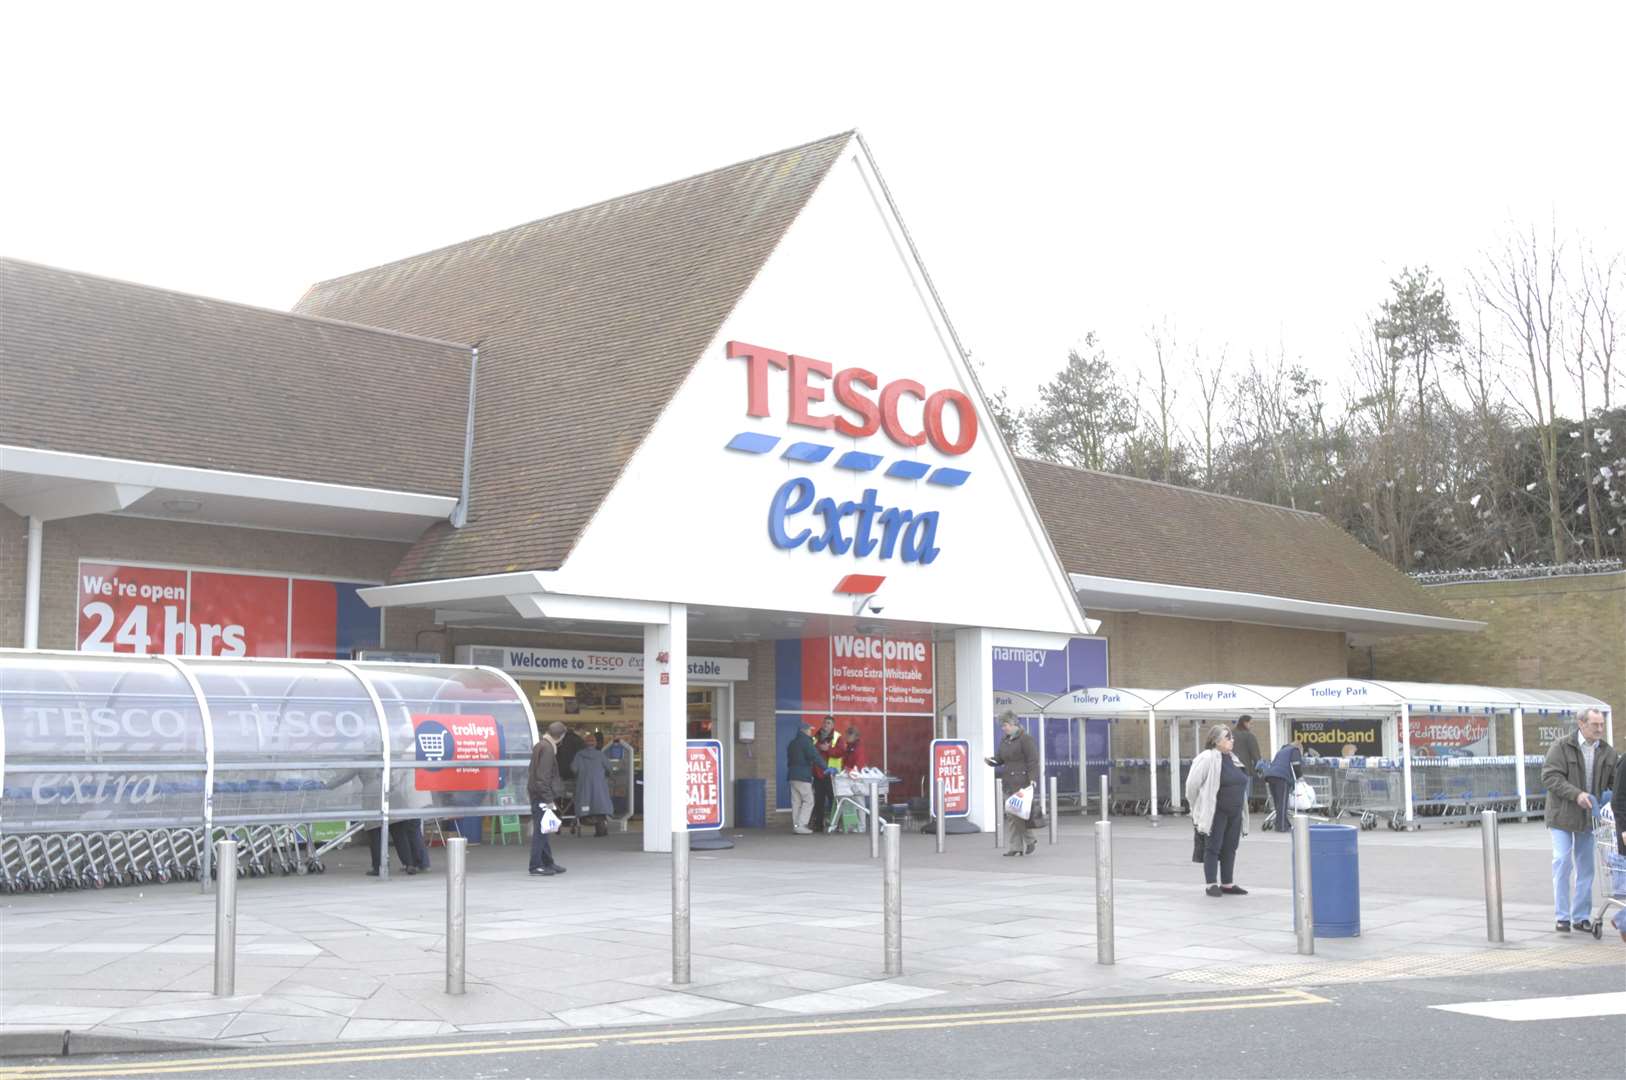 The big supermarkets started building huge new stores out-of-town which impacted local stores